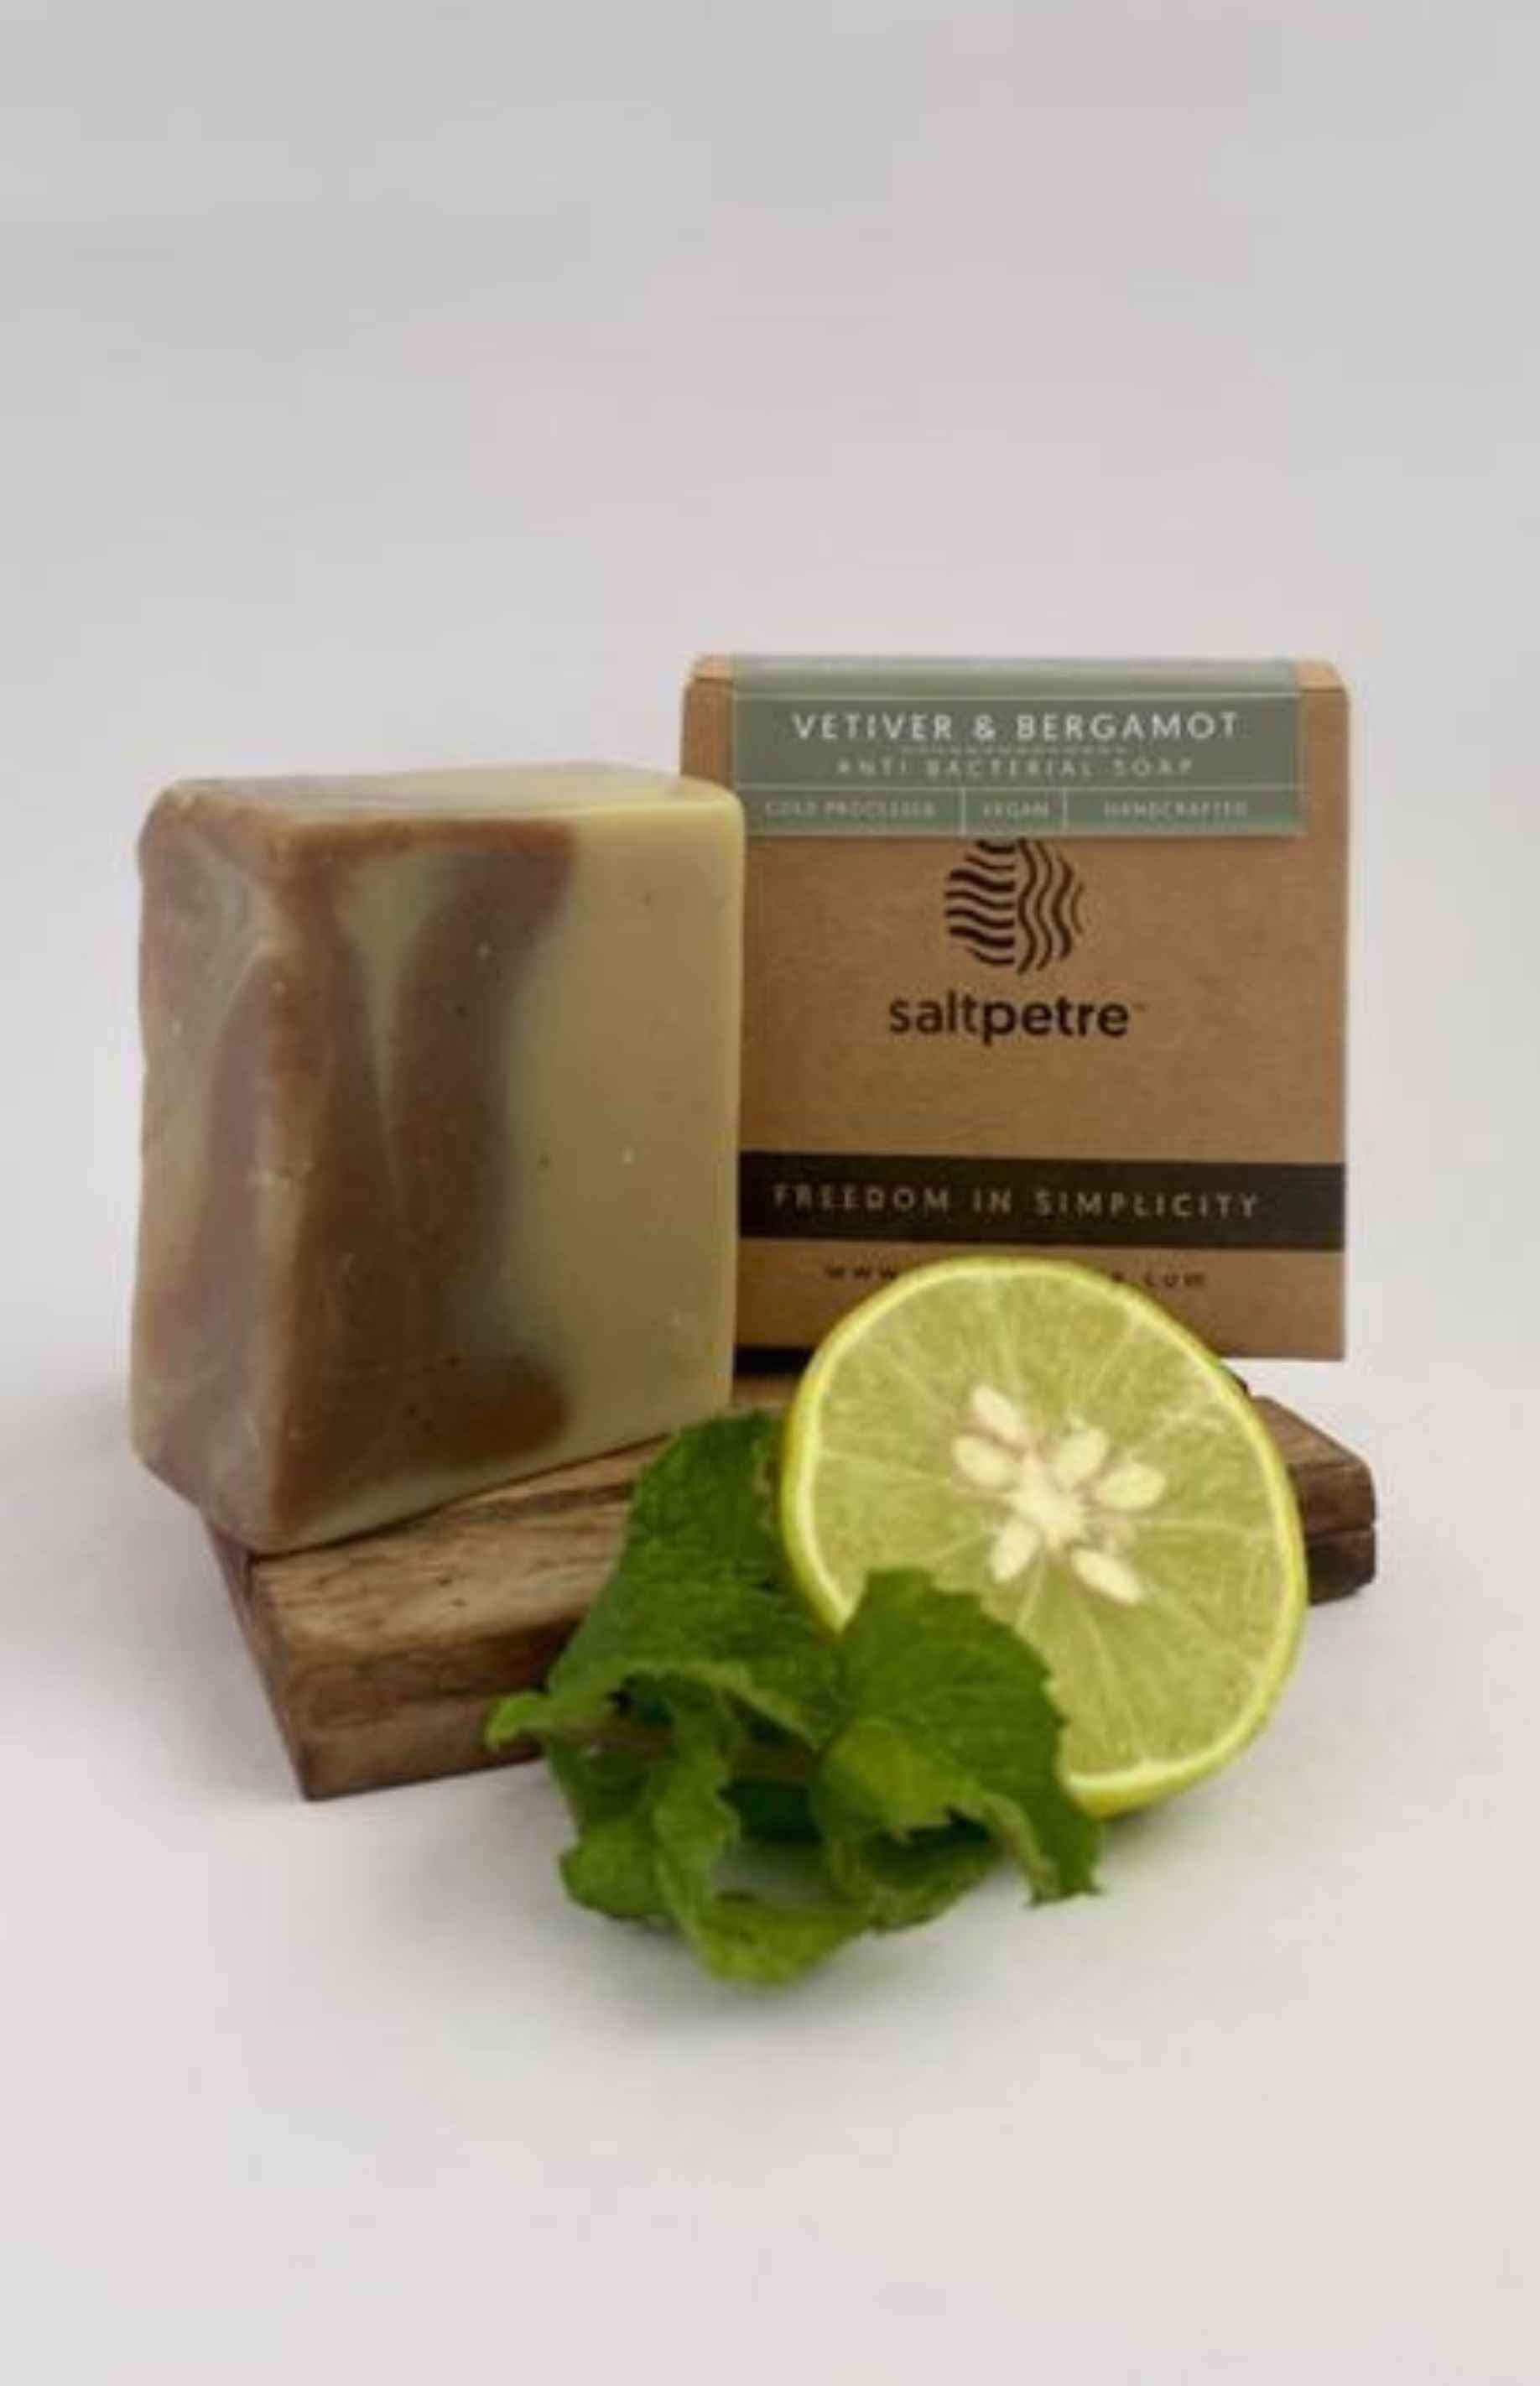 Saltpetre handmade body and face soap with natural plant extracts, handmade skincare gift set. Vegan soap made from plant oils. Bergamot & vetiver